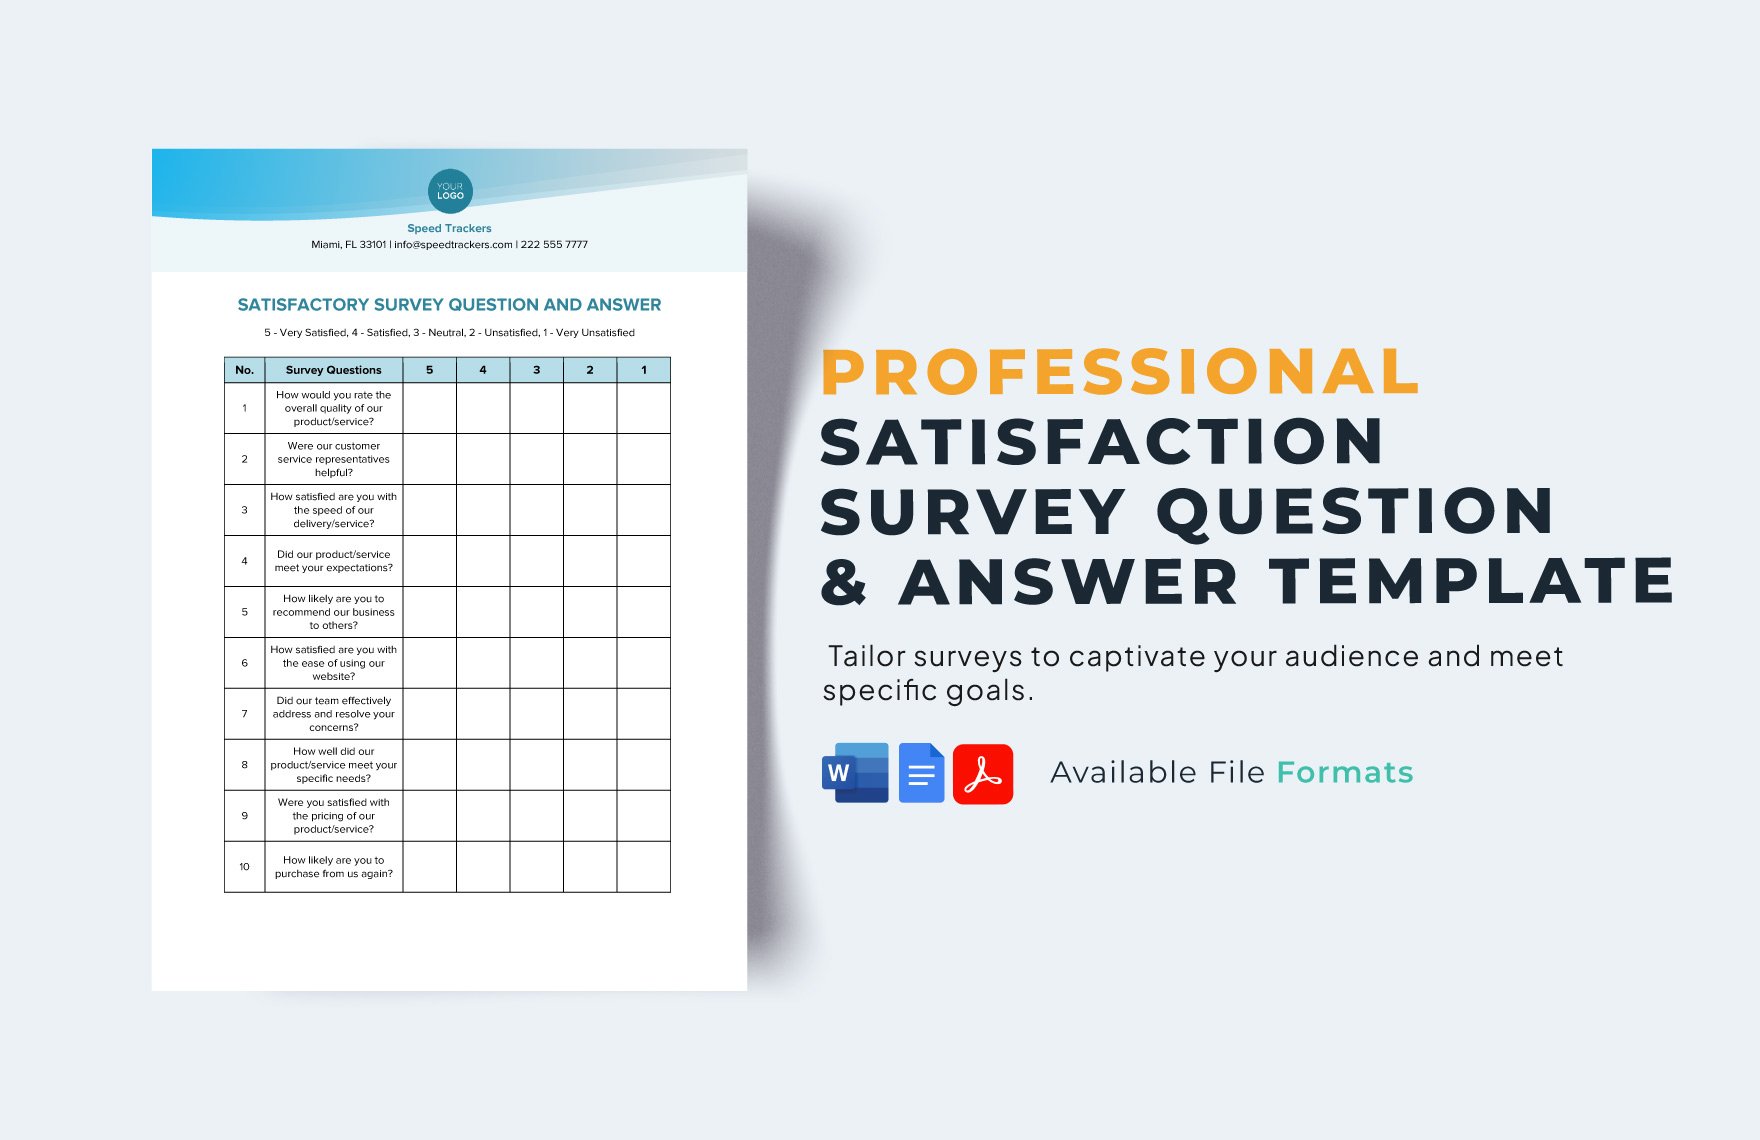 Satisfaction Survey Question & Answer Template